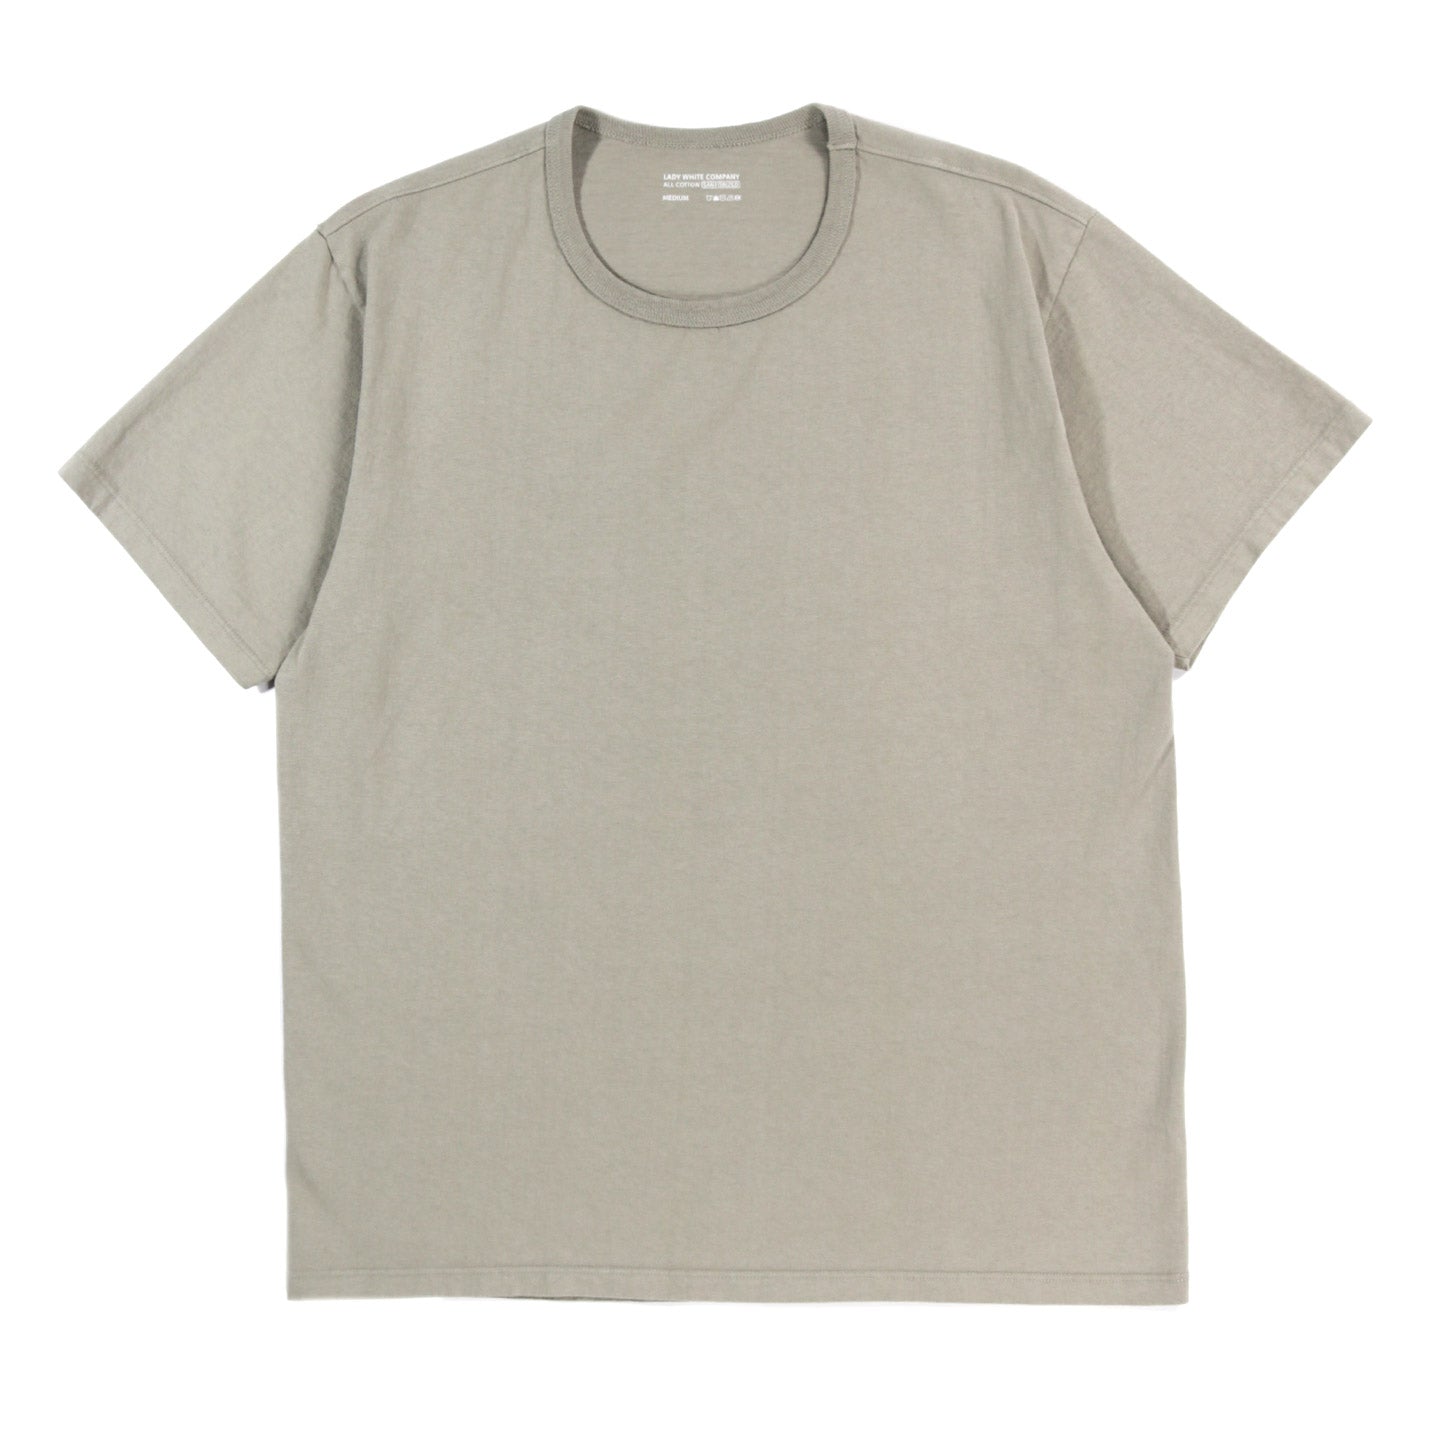 LADY WHITE CO. T-SHIRT MINERAL GREY